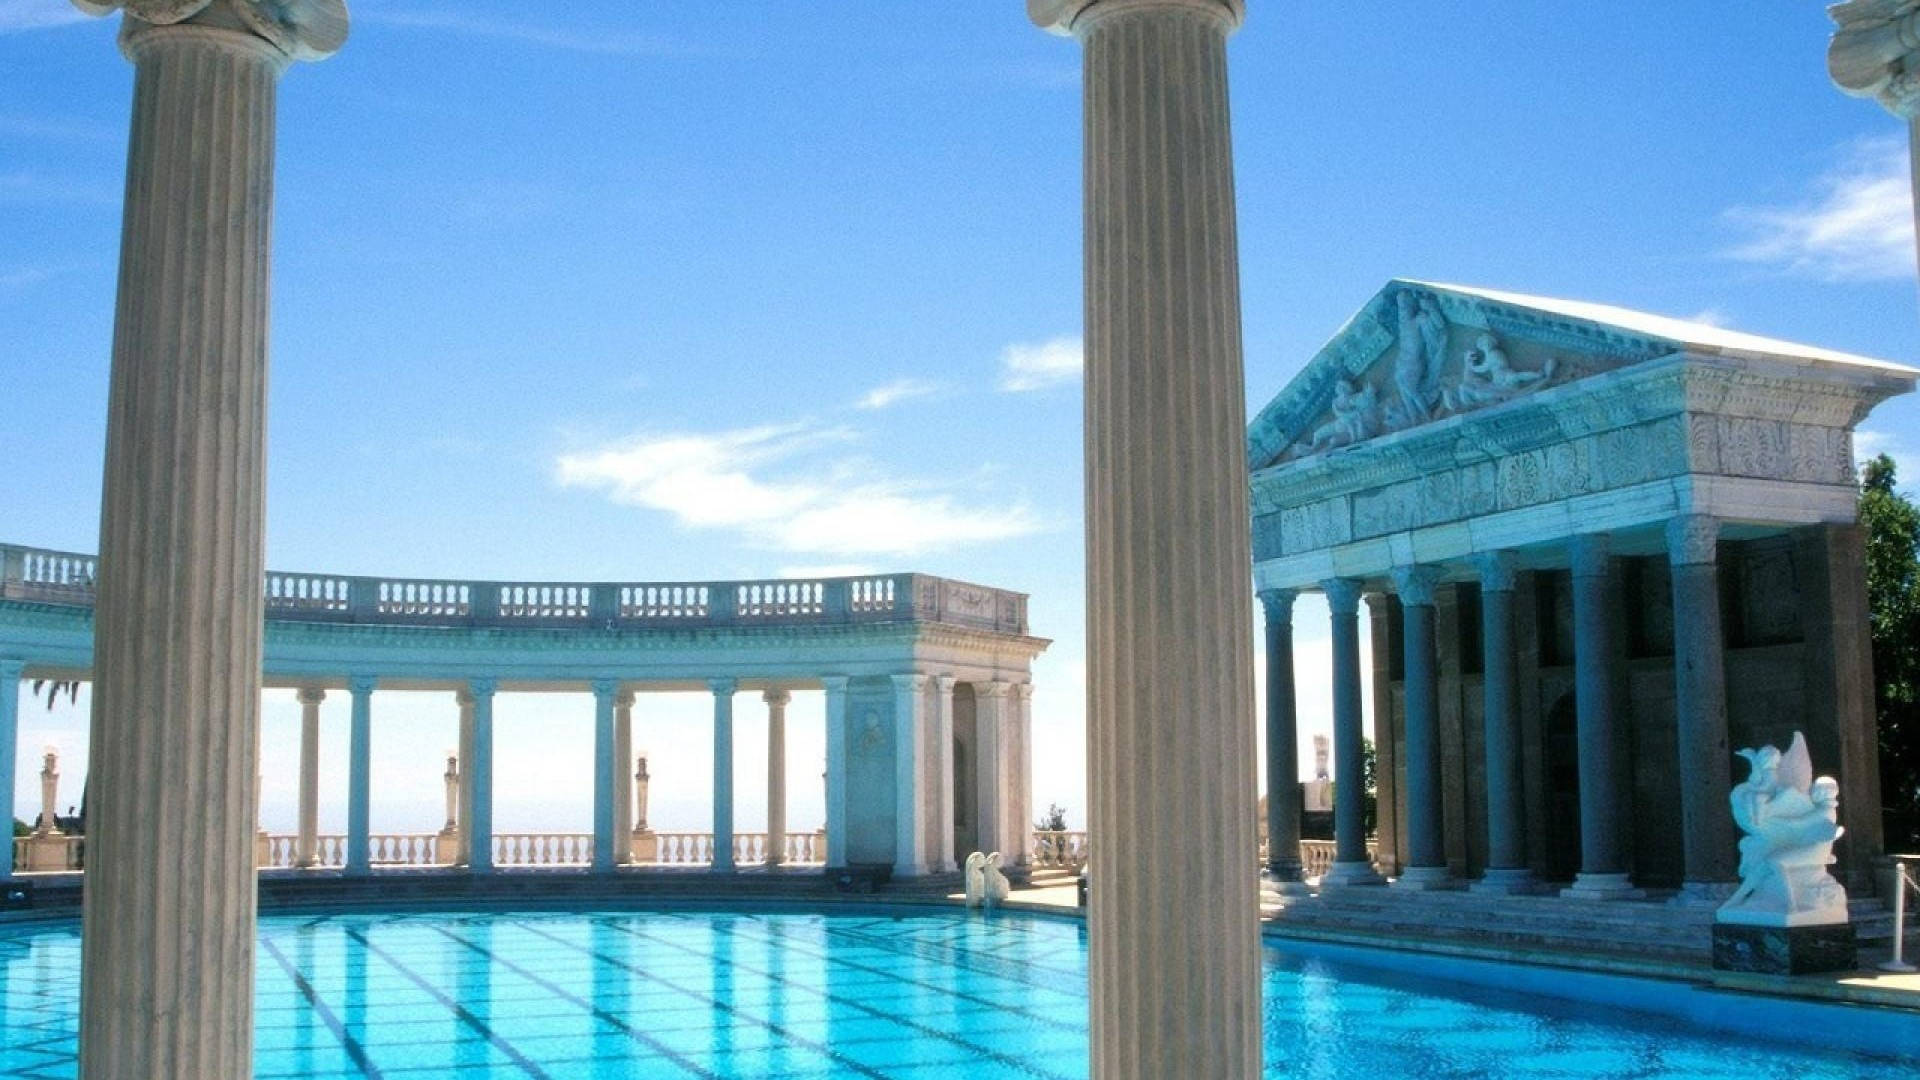 Athenswelt Griechenland Pool Wallpaper